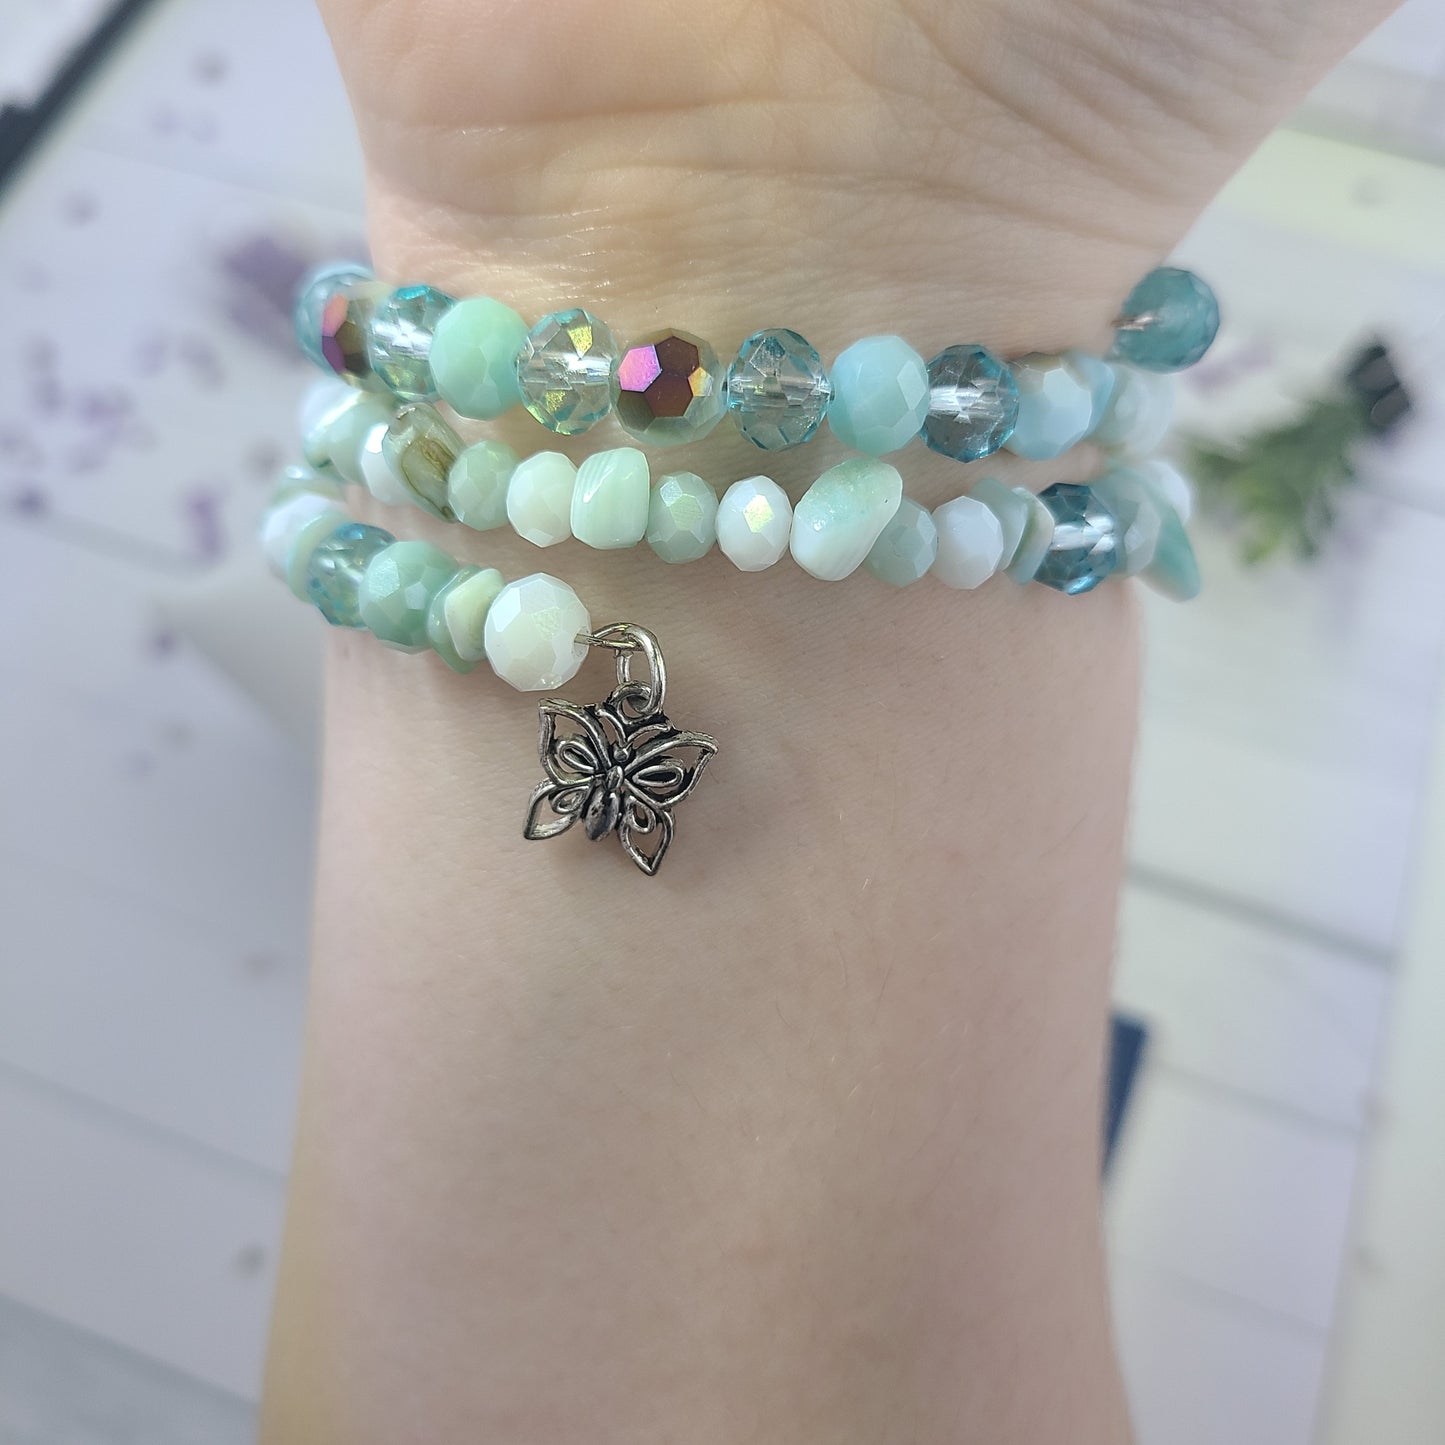 Handmade Teal, Aqua Blue Glass Memory Wire Wrap Beaded Bracelet with Silver Butterfly Charm.